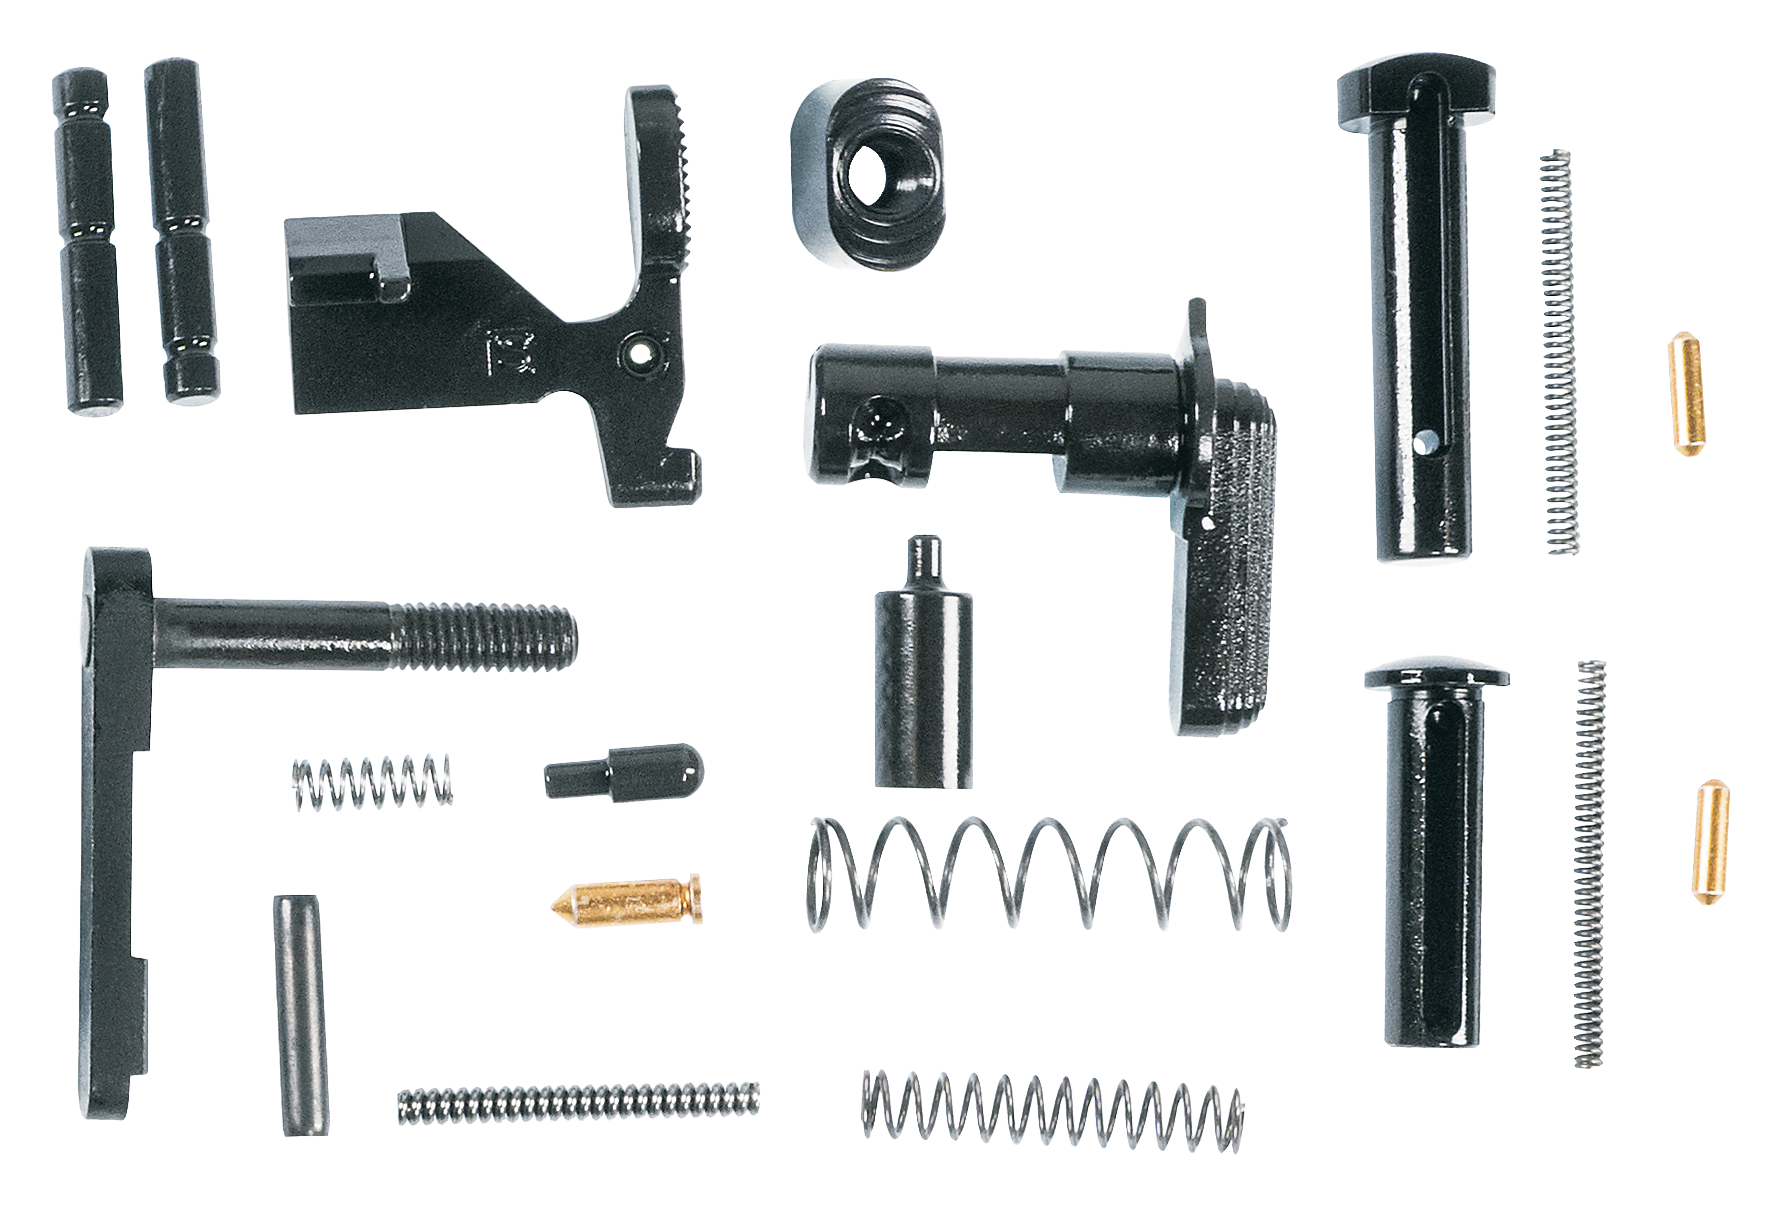 M&P AR15 Rifle Customizable Lower Parts Kit -  Smith & Wesson, 110115